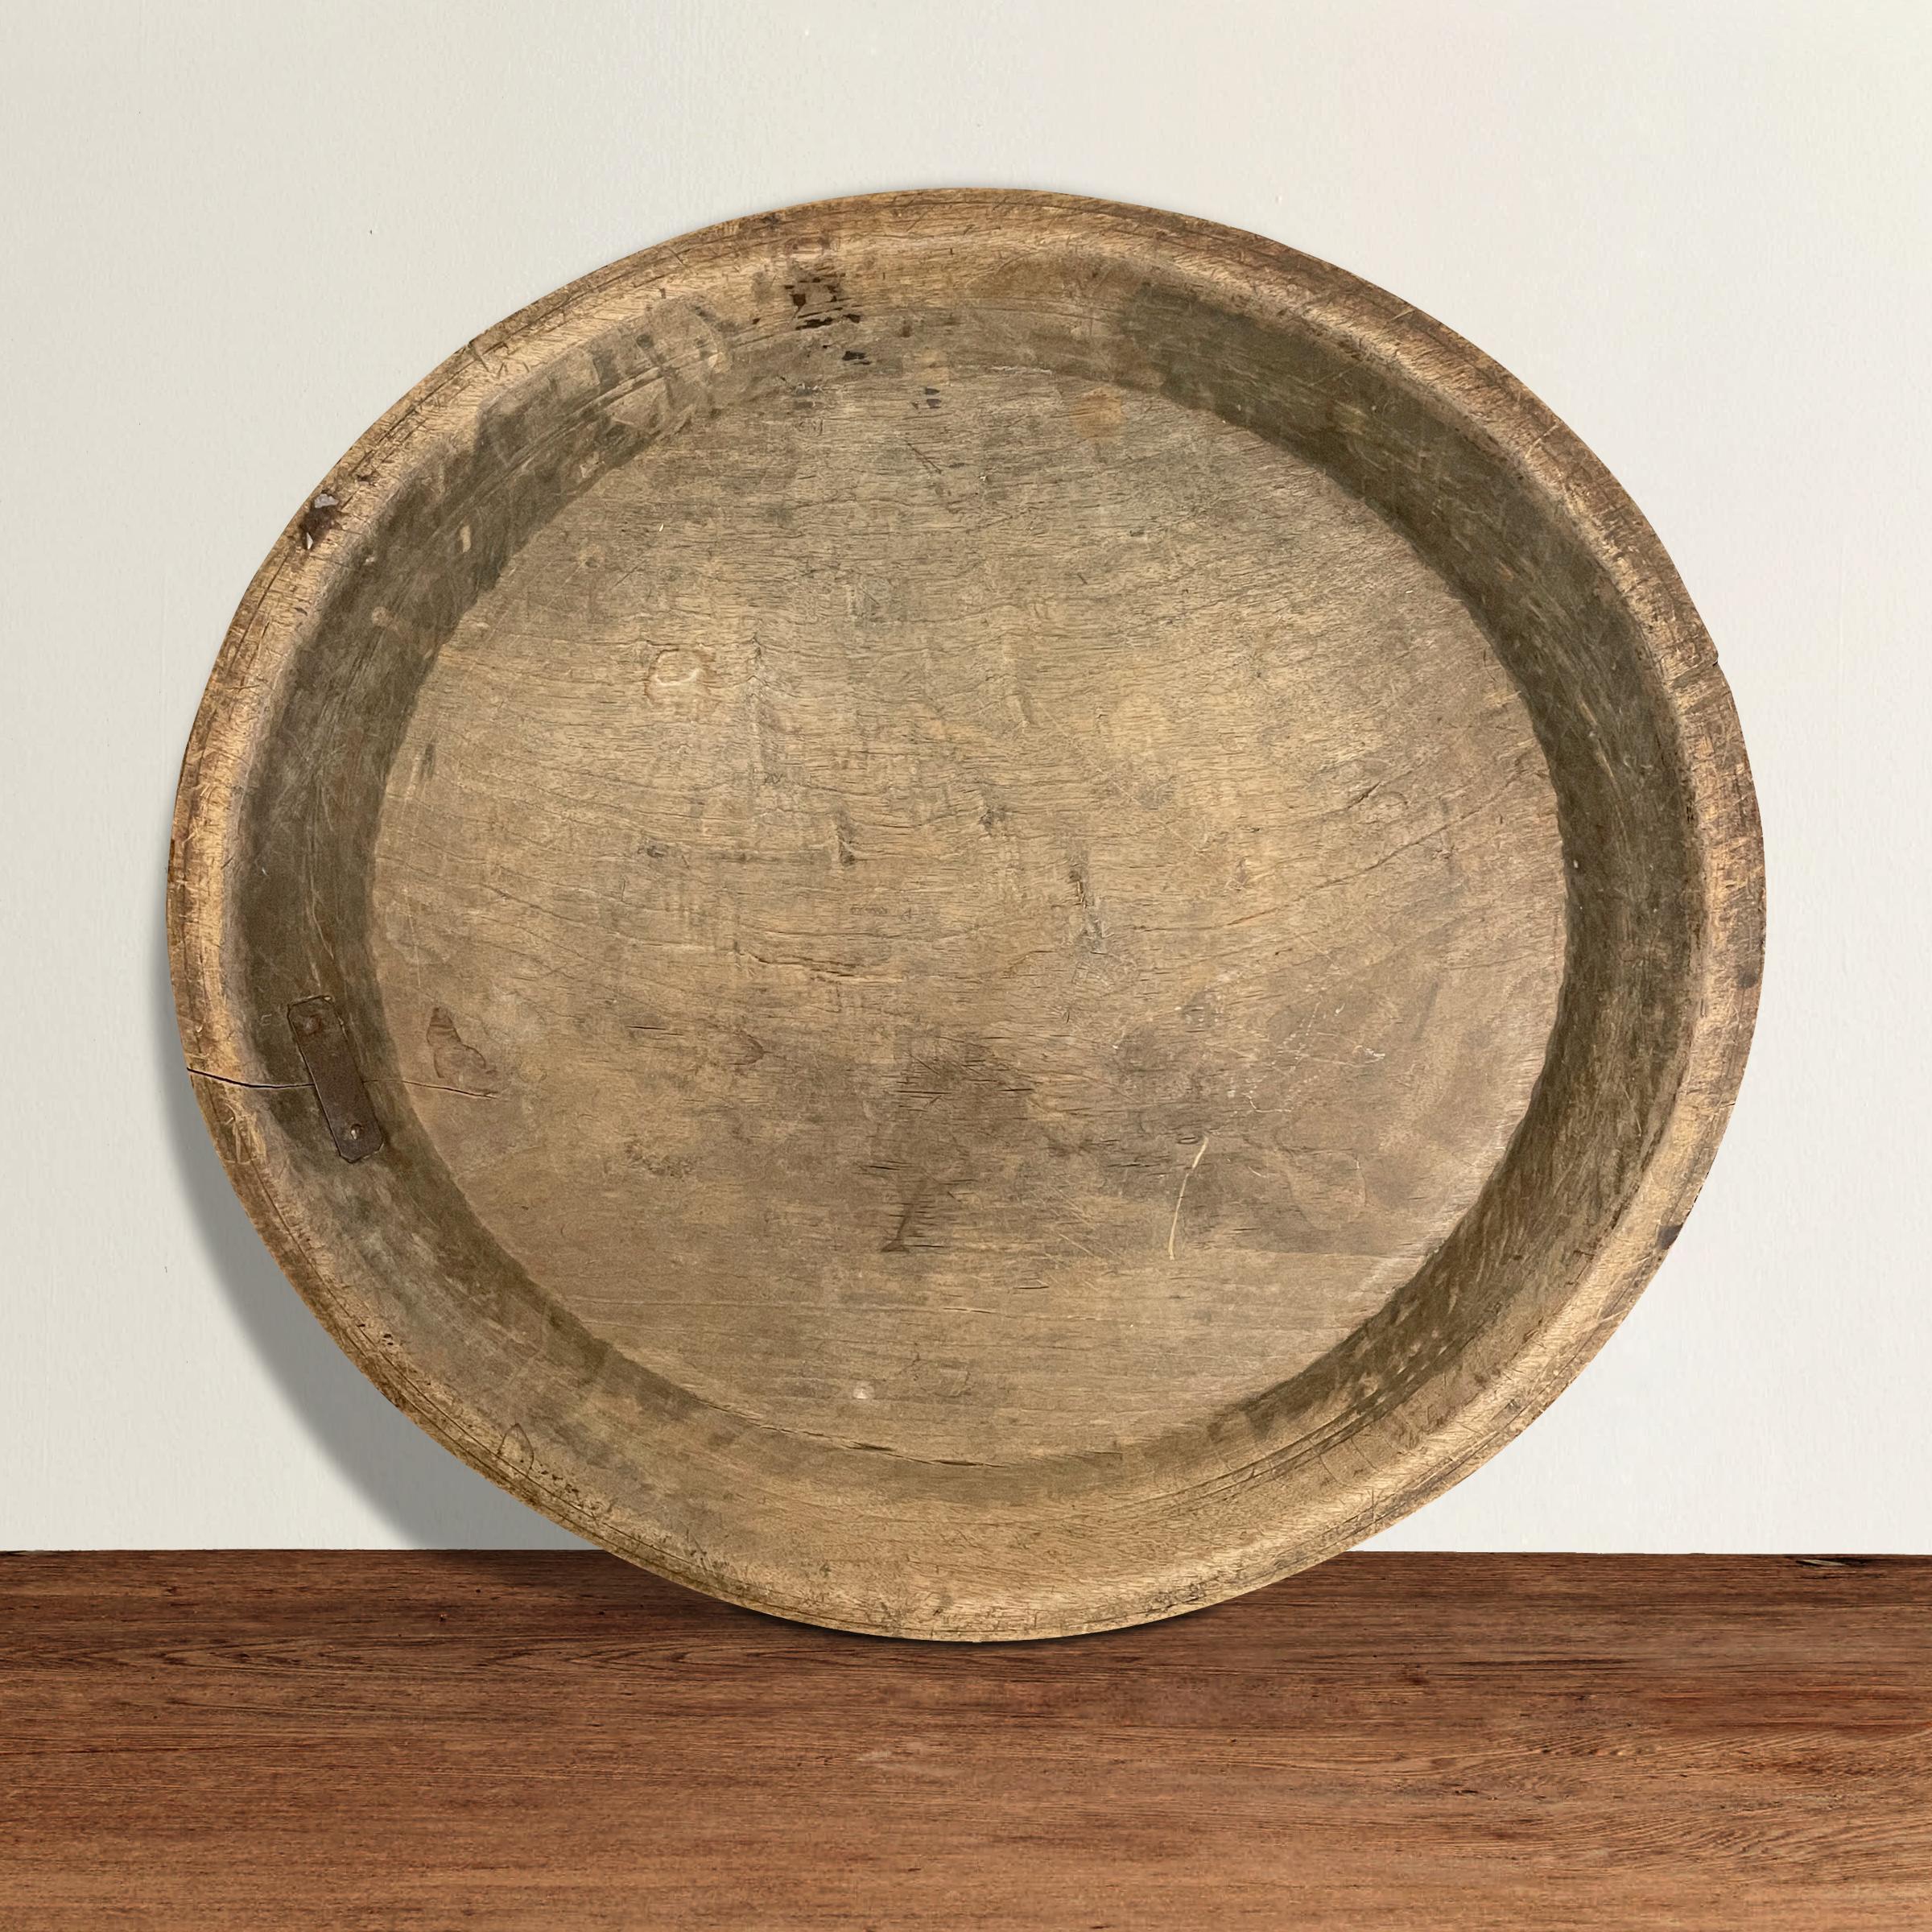 An incredible 18th century American turned wood platter with a wide rim, wonderful incised lines on the exterior, an old repair, and a weathered patina only time can provide. Perfect on your kitchen island filled with fruits and veggies, but also